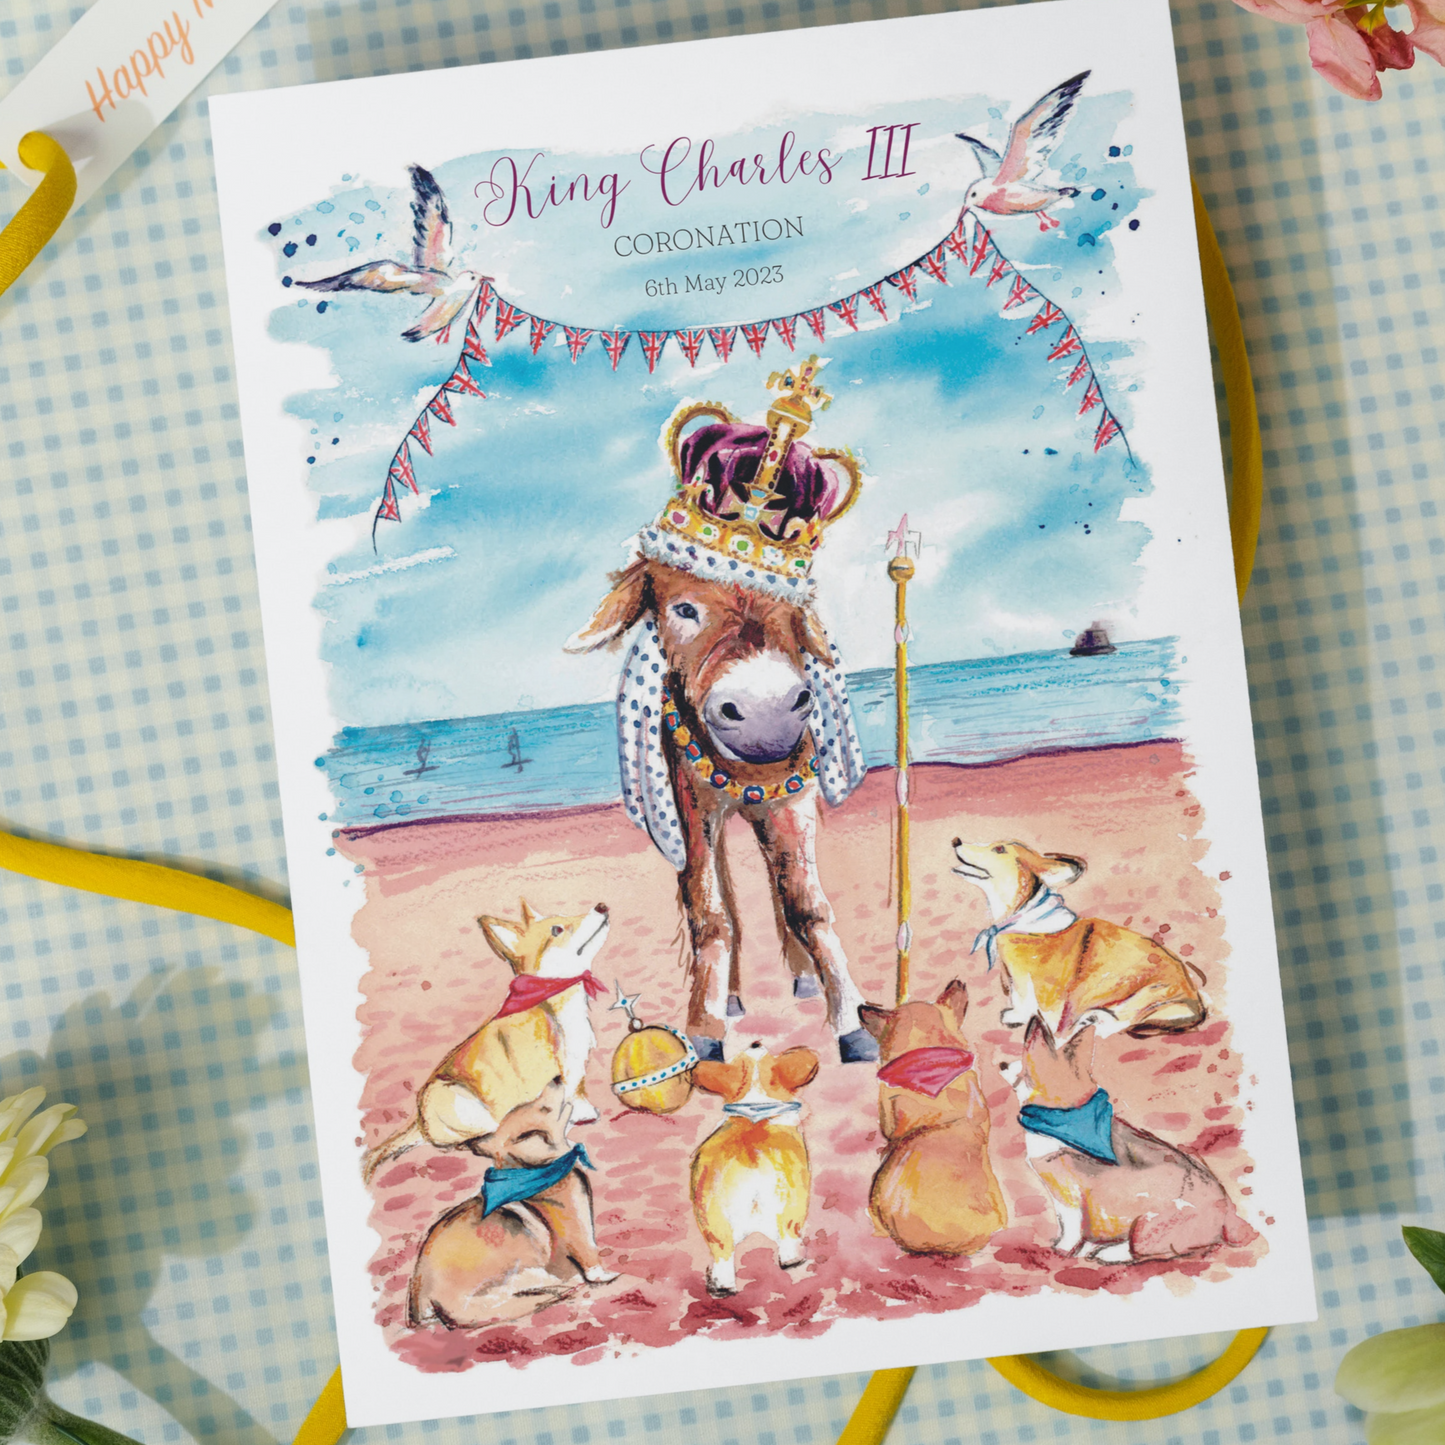 A limited edition signed print to commemorate King Charles III Coronation, featuring a donkey in the crown jewels on Cleethorpes beach surrounded by some royal corgis. Painted in watercolours by Eve Leoni Smith.